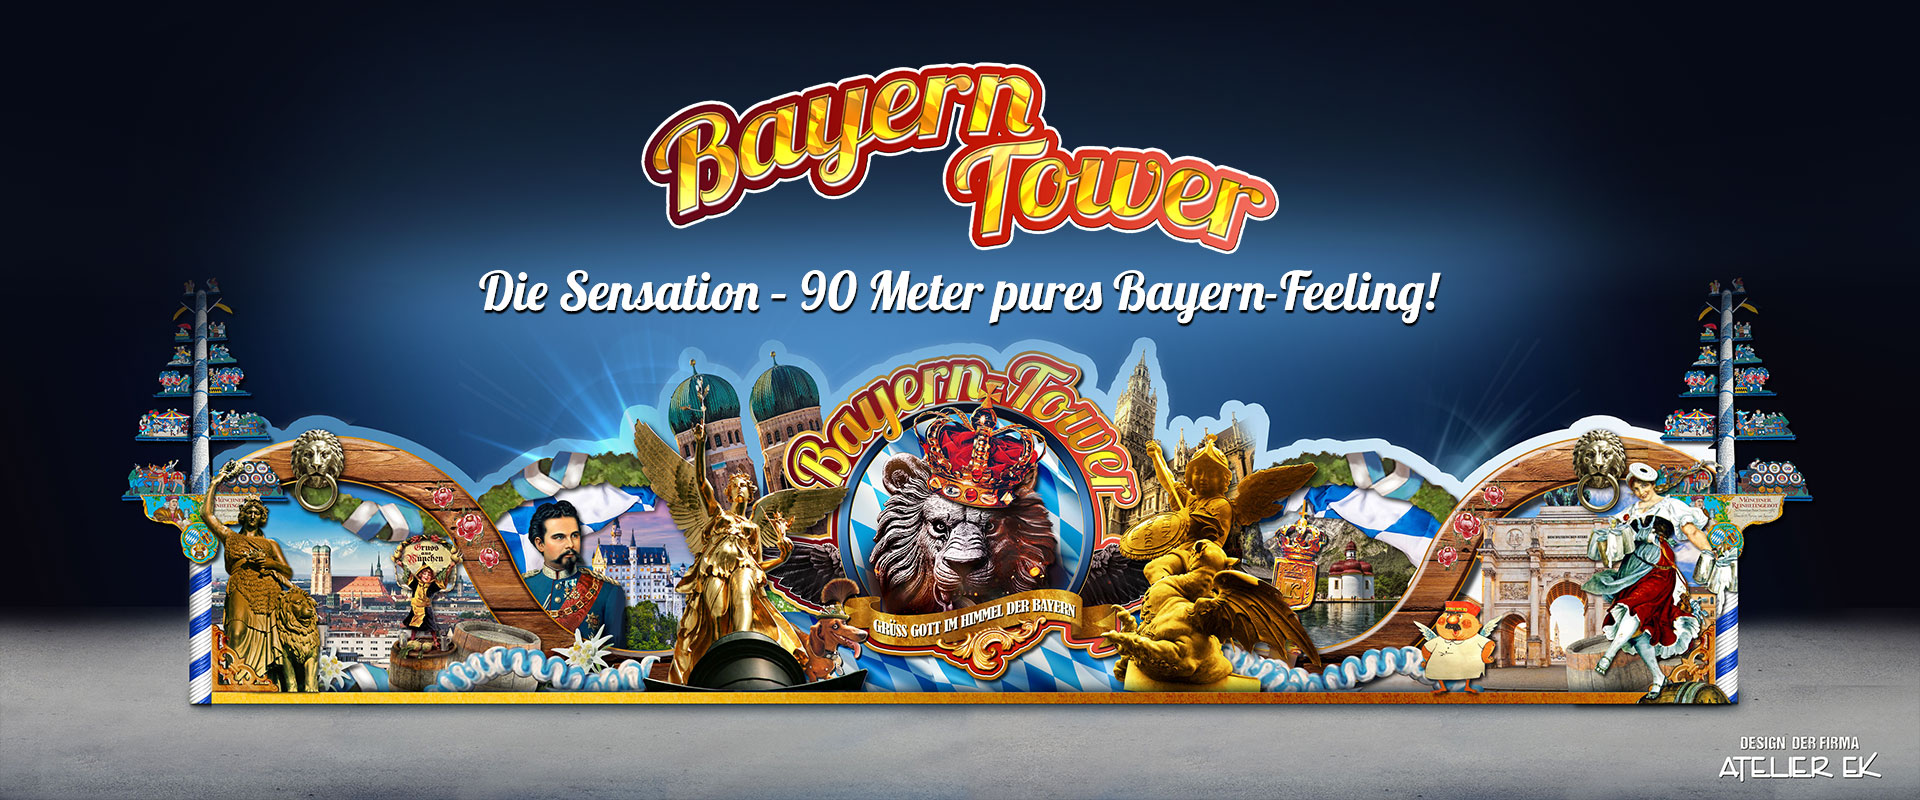 Front des Bayern-Towers